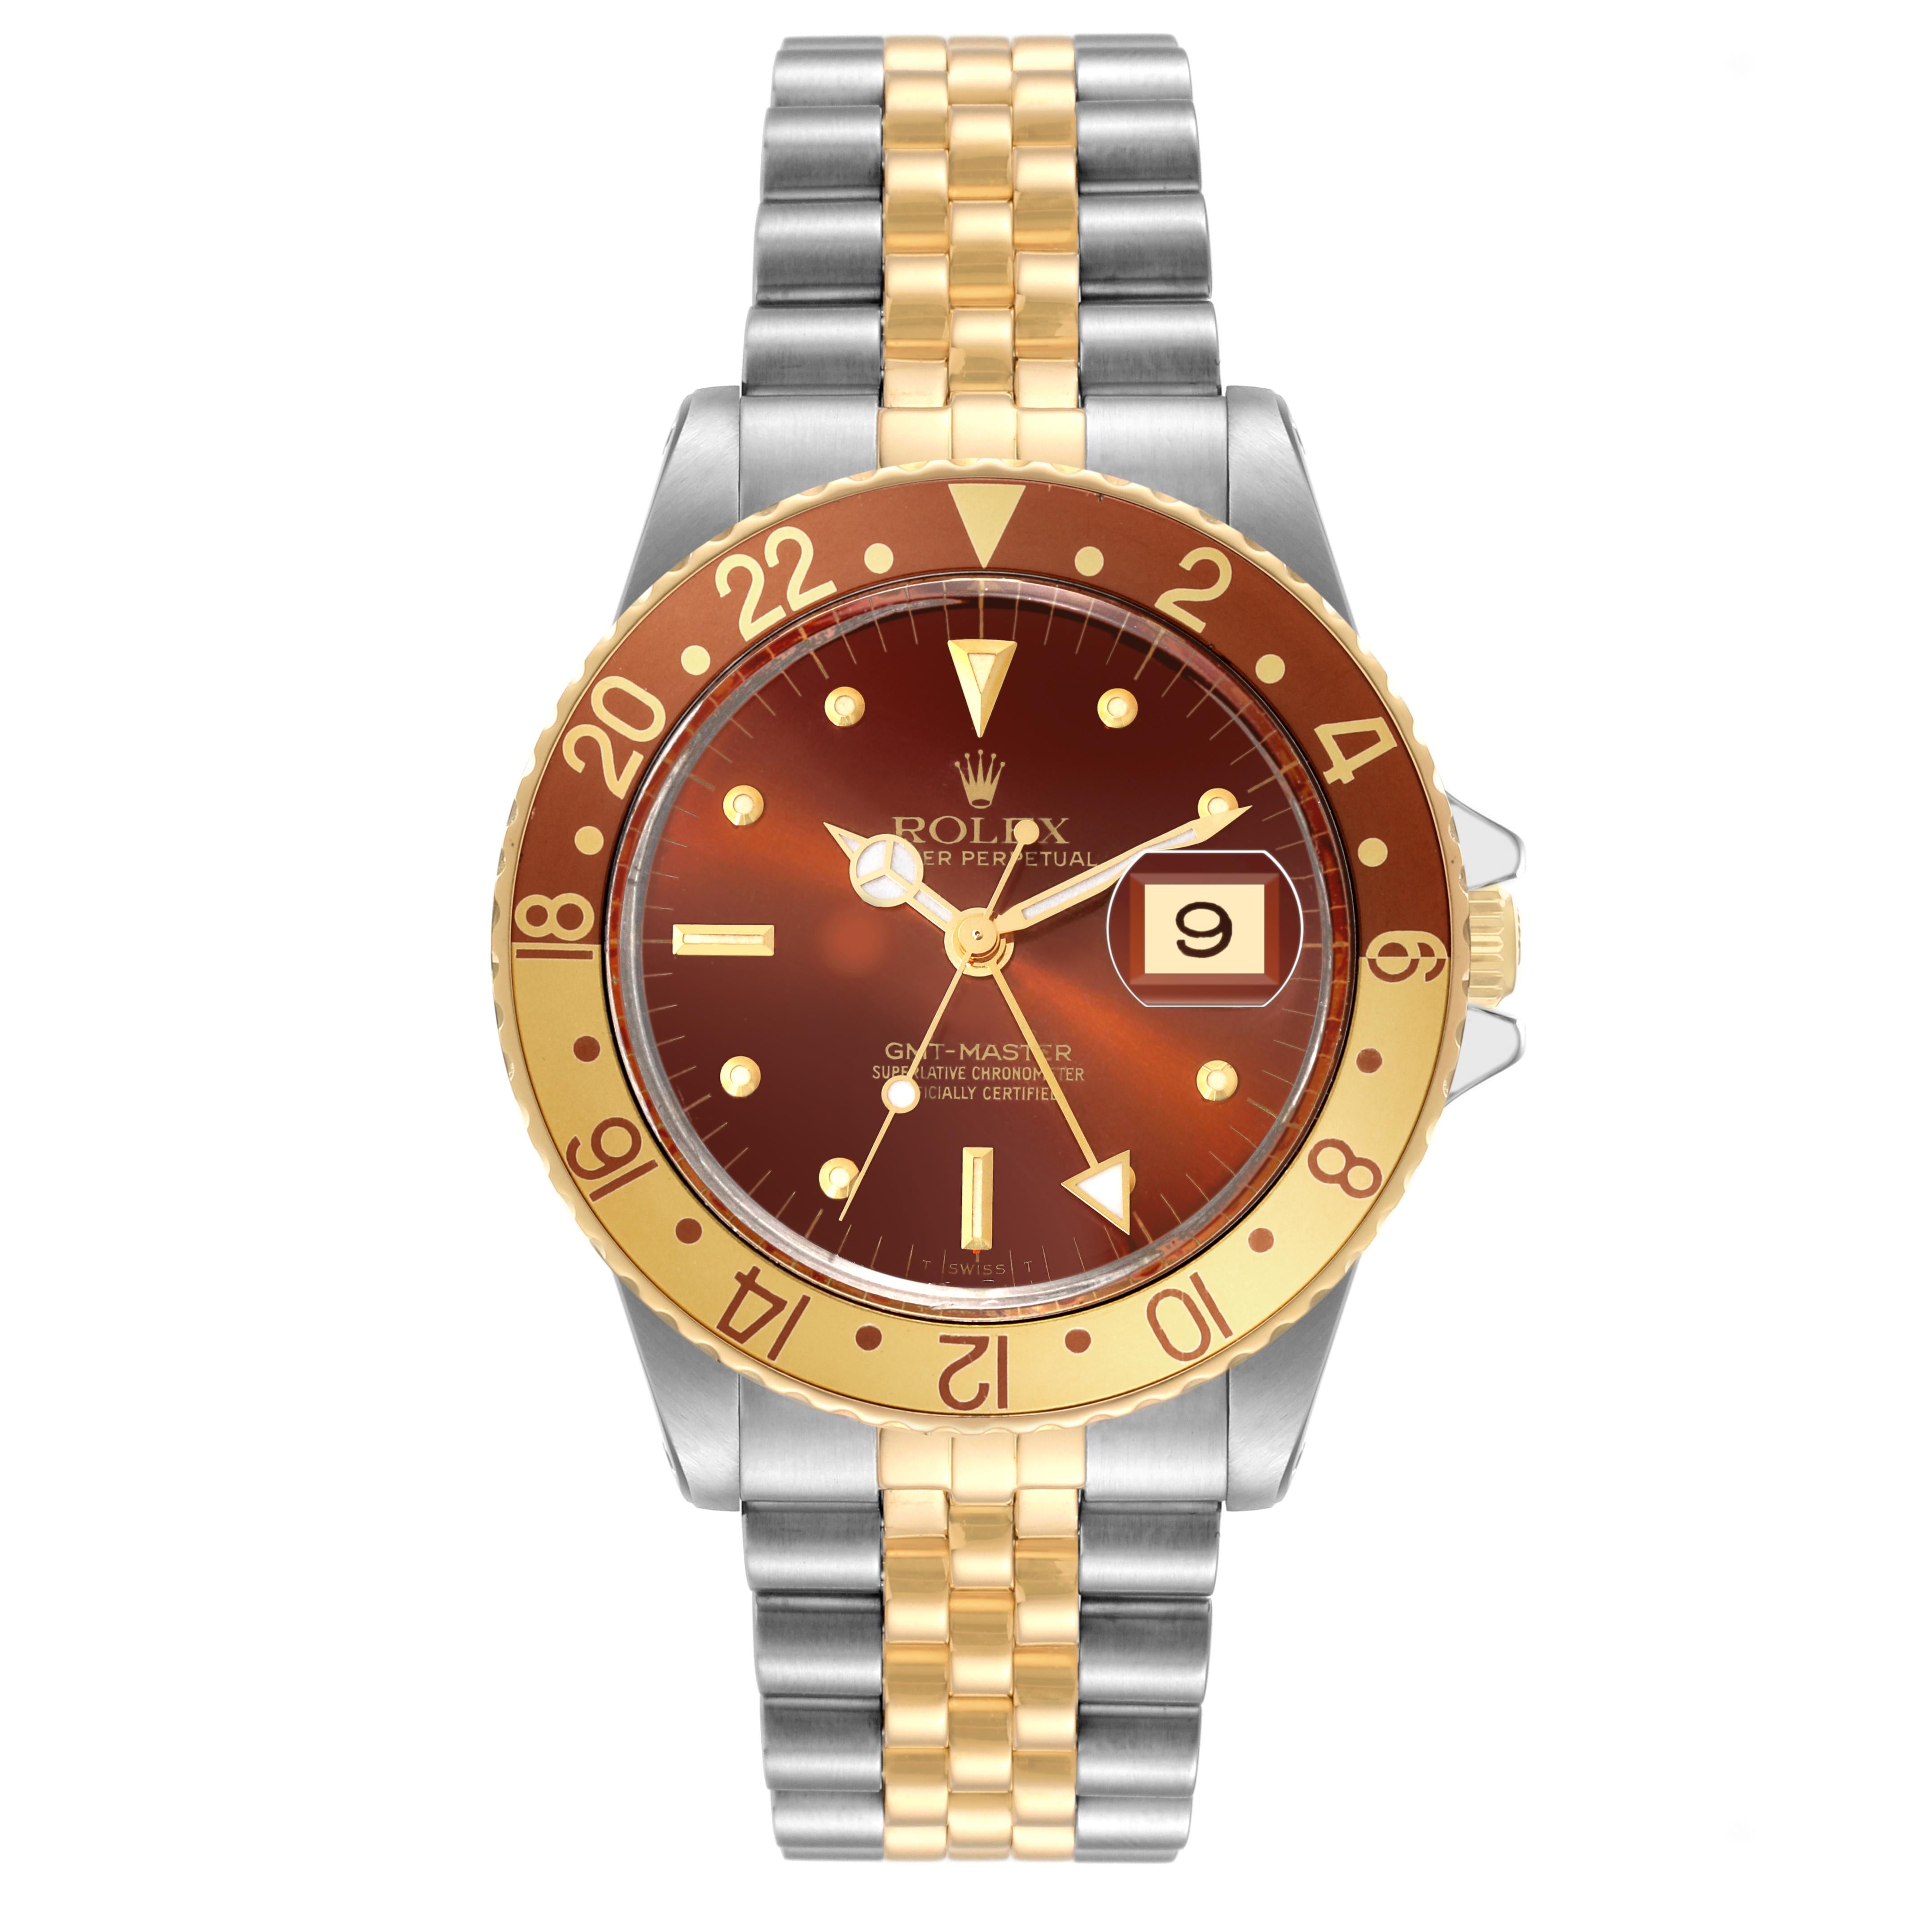 Rolex GMT Master Rootbeer Yellow Gold Steel Vintage Mens Watch 16753. Officially certified chronometer automatic self-winding movement. Stainless steel case 40 mm in diameter. Rolex logo on a crown. 18k yellow gold bidirectional rotating bezel with